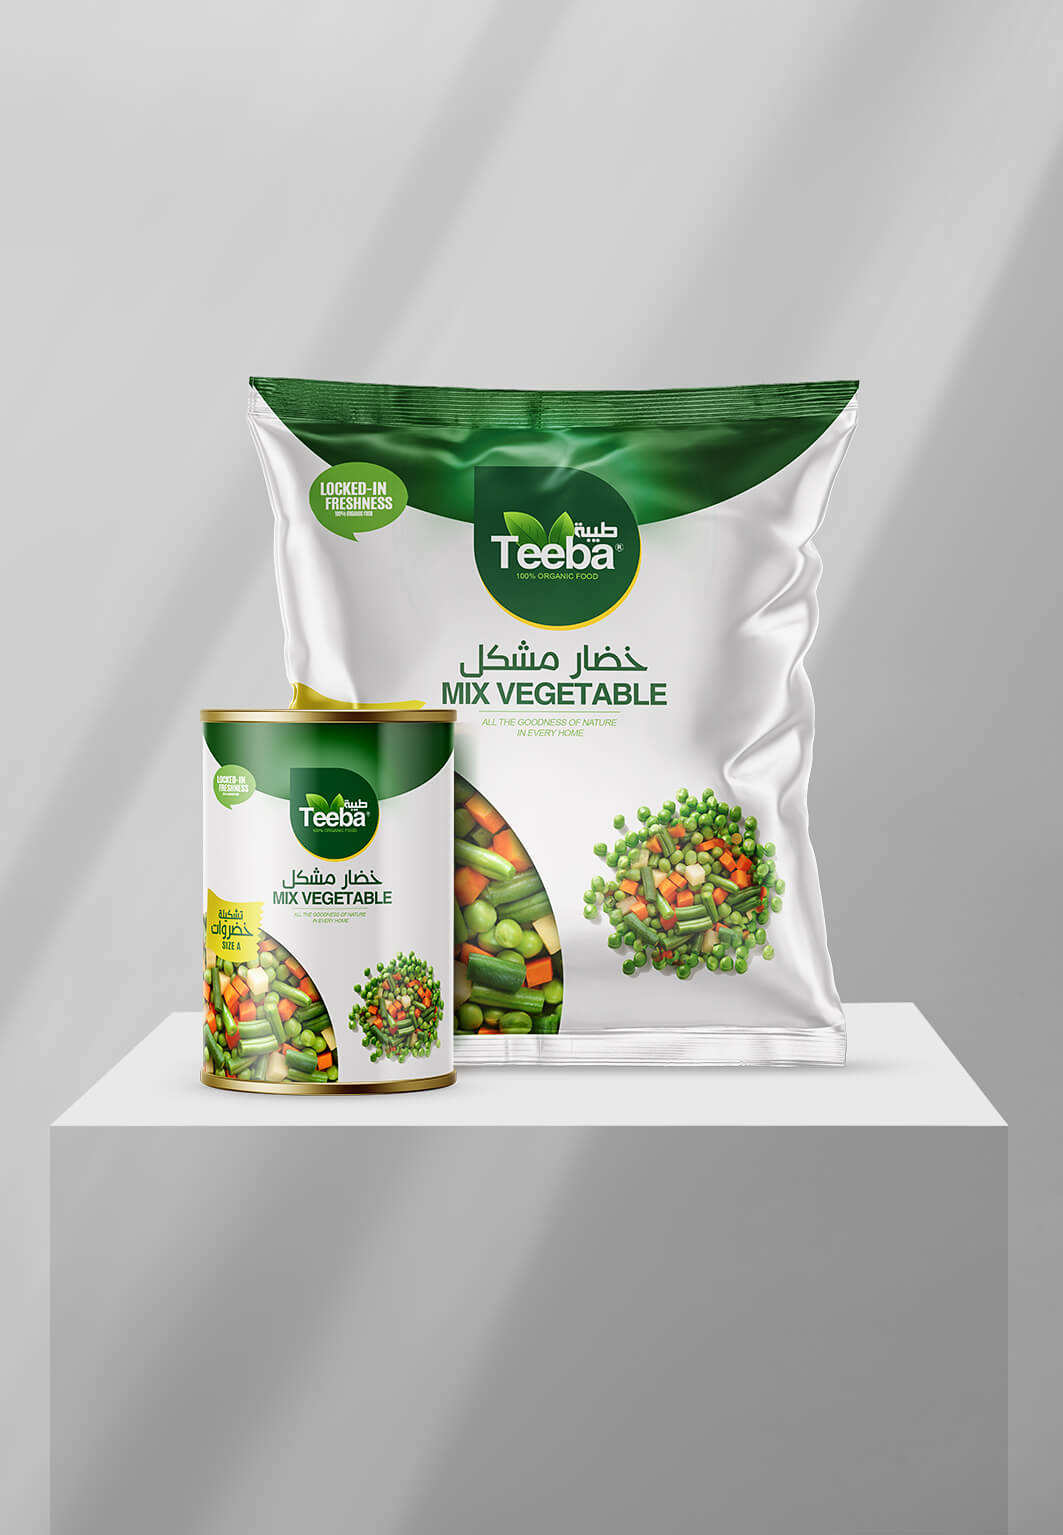 Teeba frozen food products are a fantastic option for anyone looking for high-quality, delicious frozen food. As the designer of their packaging, I can attest to the fact that they have a wide variety of products, from plastic bags to tin options, all of which are beautifully presented. The packaging design features a stunning combination of dark green and white, which provides a fresh and modern look to the products. Teeba frozen food products are manufactured by an Egyptian company but based in Ireland. With their extensive range of frozen food products, Teba is sure to have something to suit every taste and preference.<br />
Designing frozen food packaging that stands out from the competition can be a daunting task, but it was one that I relished. I had to consider various factors such as the brand's values, target audience, and market trends while coming up with a design that would make Teeba's frozen food products more appealing to customers. The challenge was to create a design that not only looked great but also conveyed the quality and freshness of the products. However, with careful consideration of every detail, I was able to design packaging that truly stands out on store shelves and helps Teeba's frozen food products to stand out from the crowd.